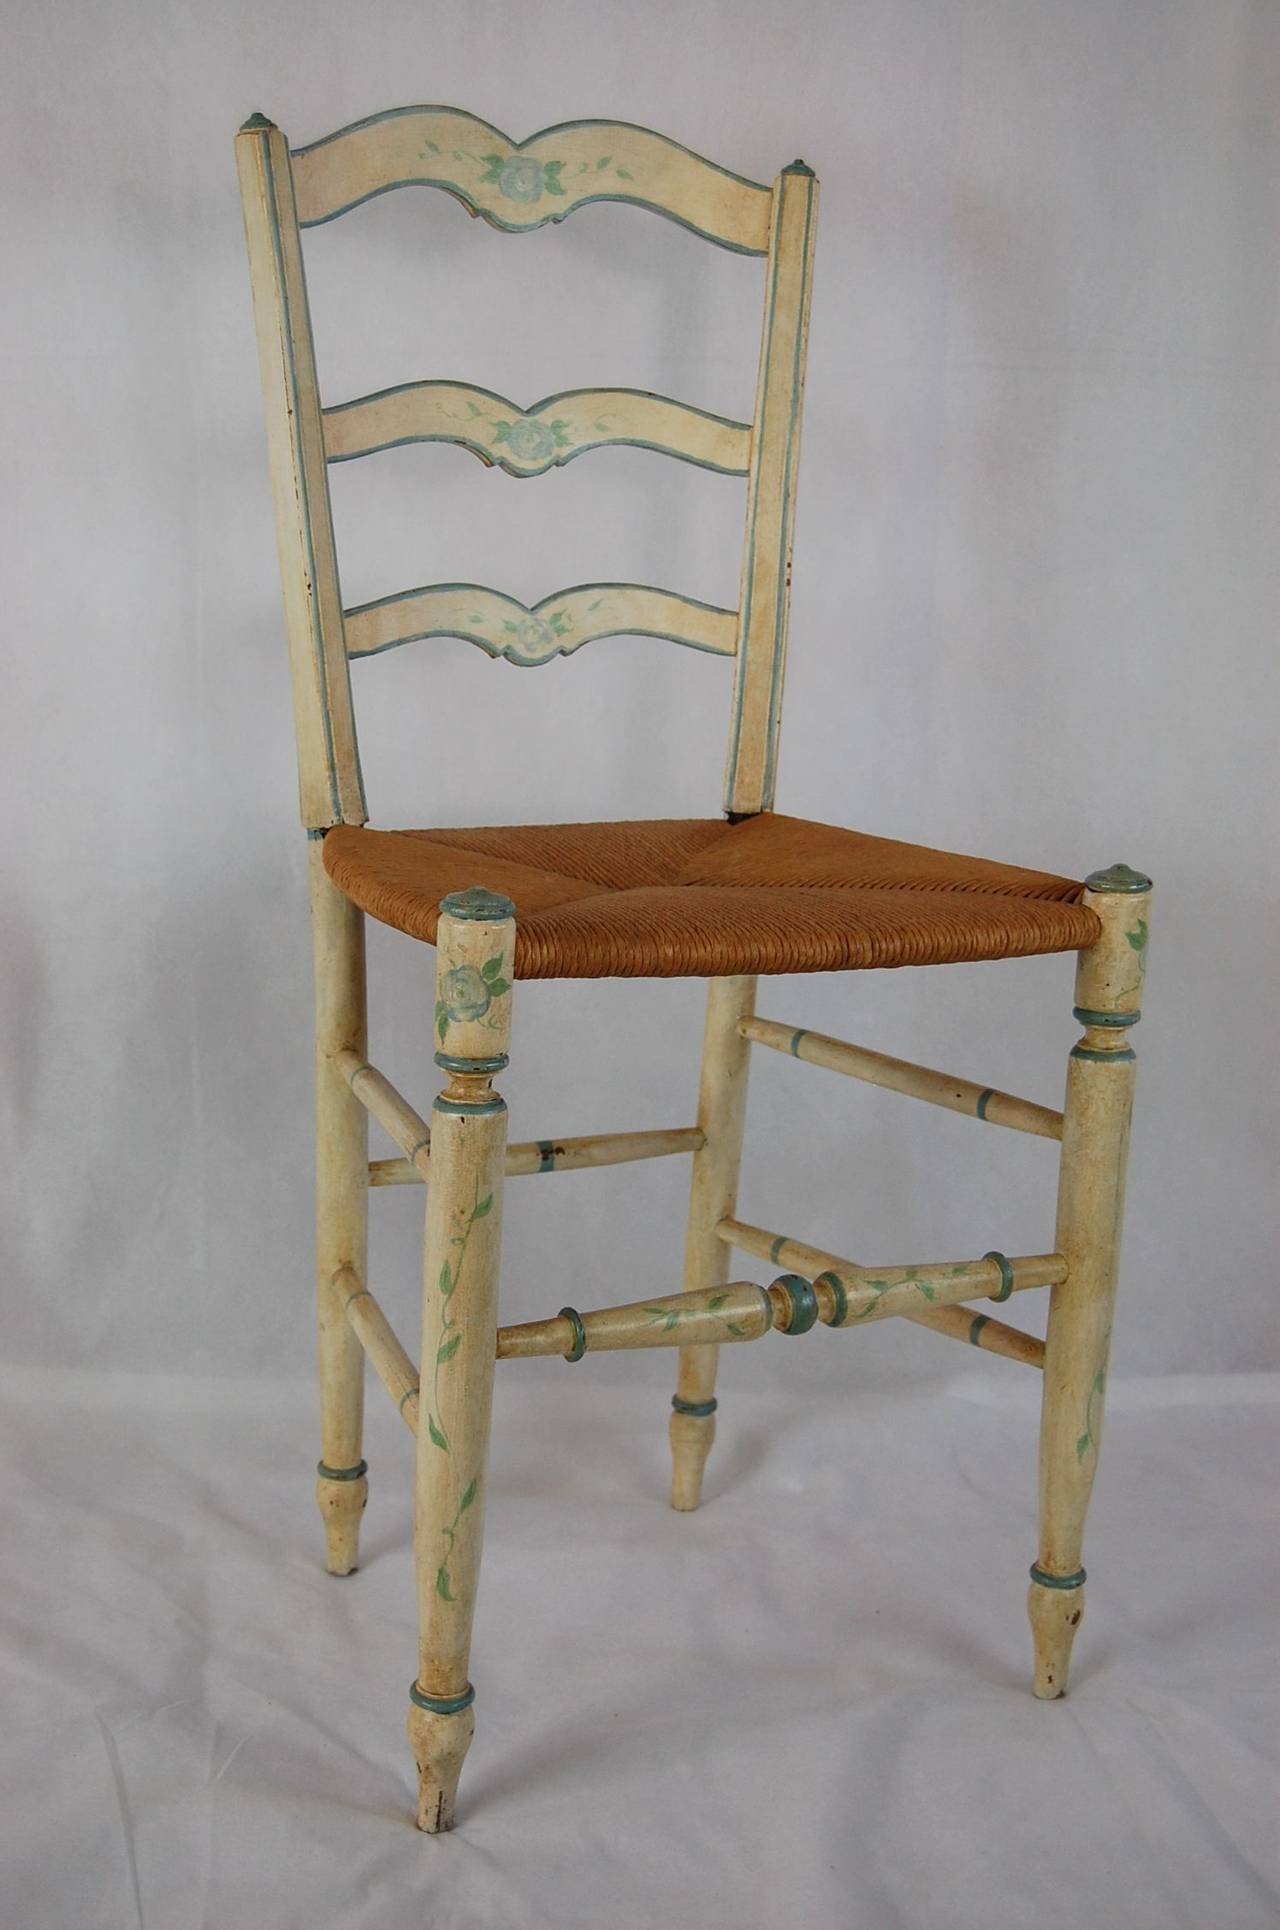 Petite French-style side chair in white paint finish with floral decorations and rush seat. In excellent condition with an age relative patina. The frame is tight and the seat was replaced a few years ago. Seat: 15.5